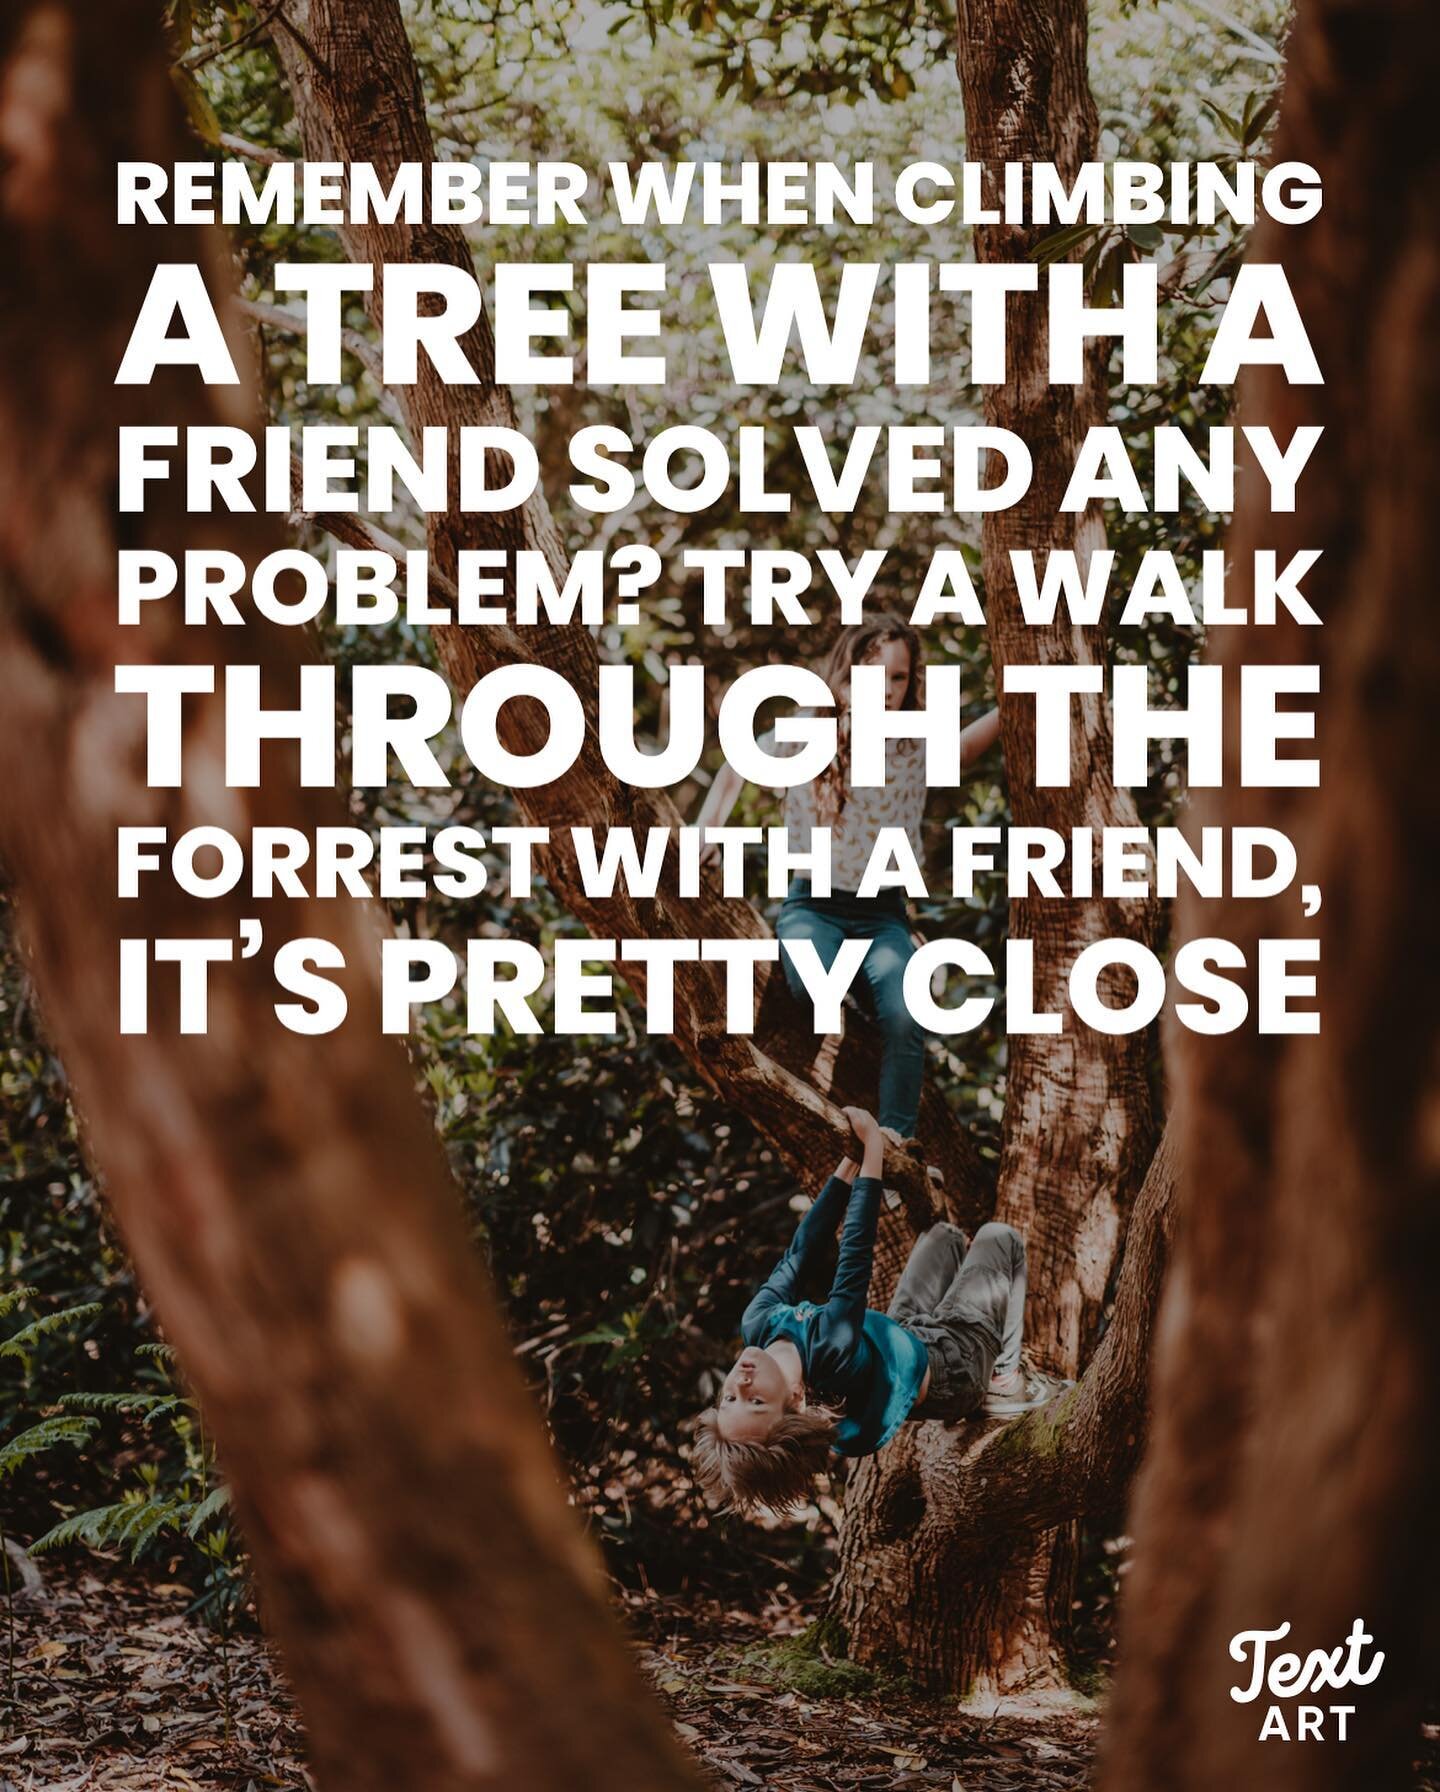 #friendship #treeclimbing #nature #meditation #beingpresent #childhood #wonder #awe #lifequotes #life #lifecoach #careercoach #meaning #fulfillment